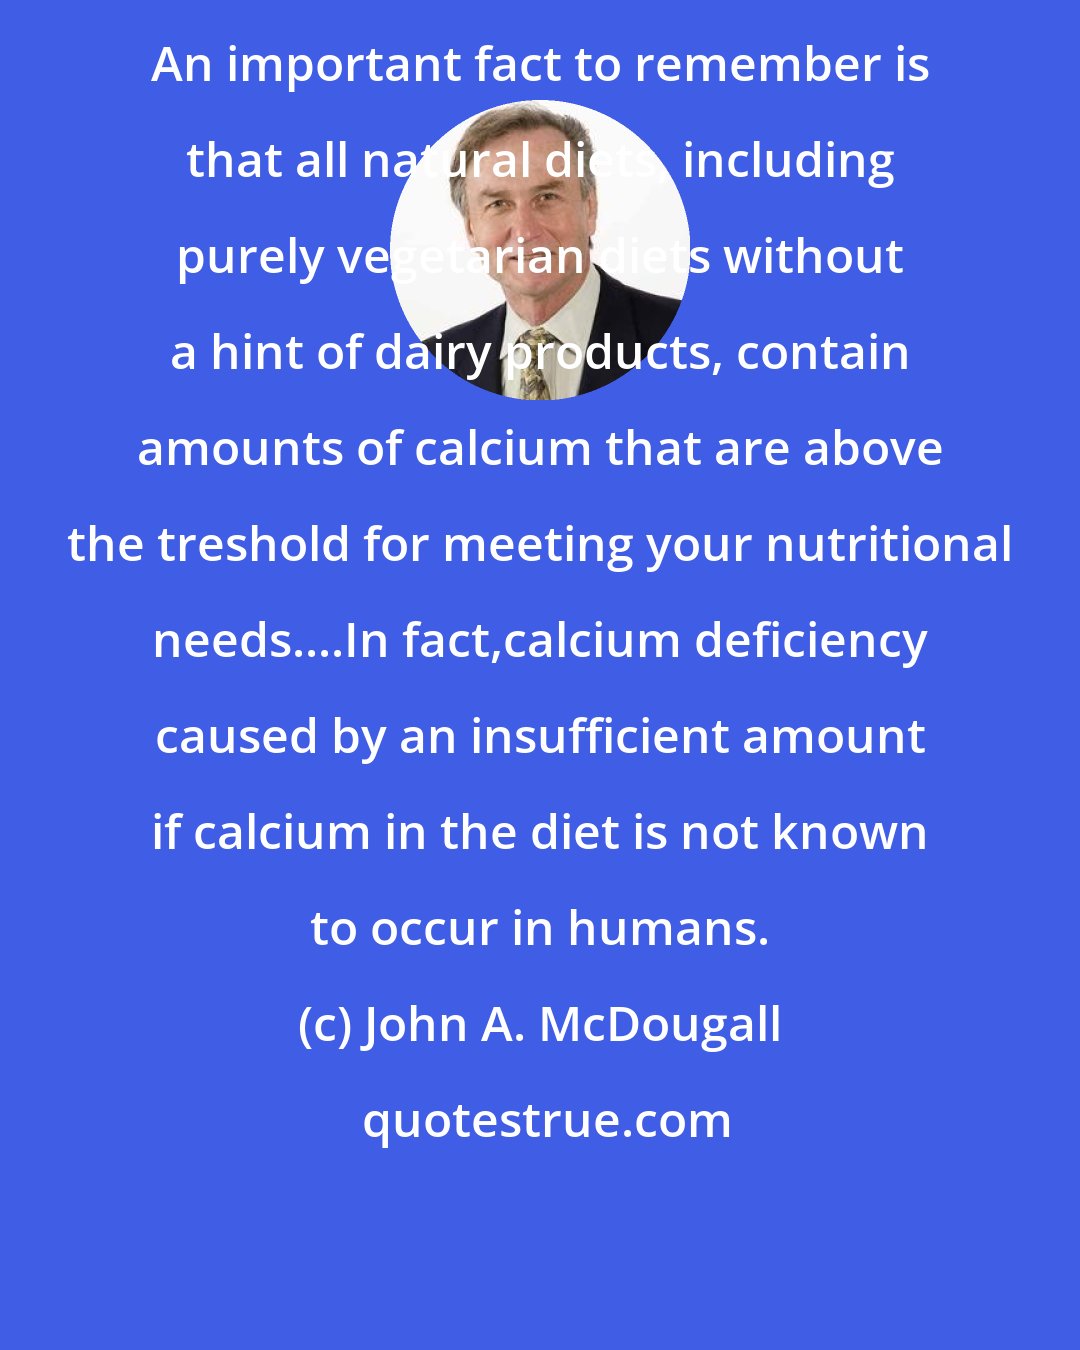 John A. McDougall: An important fact to remember is that all natural diets, including purely vegetarian diets without a hint of dairy products, contain amounts of calcium that are above the treshold for meeting your nutritional needs....In fact,calcium deficiency caused by an insufficient amount if calcium in the diet is not known to occur in humans.